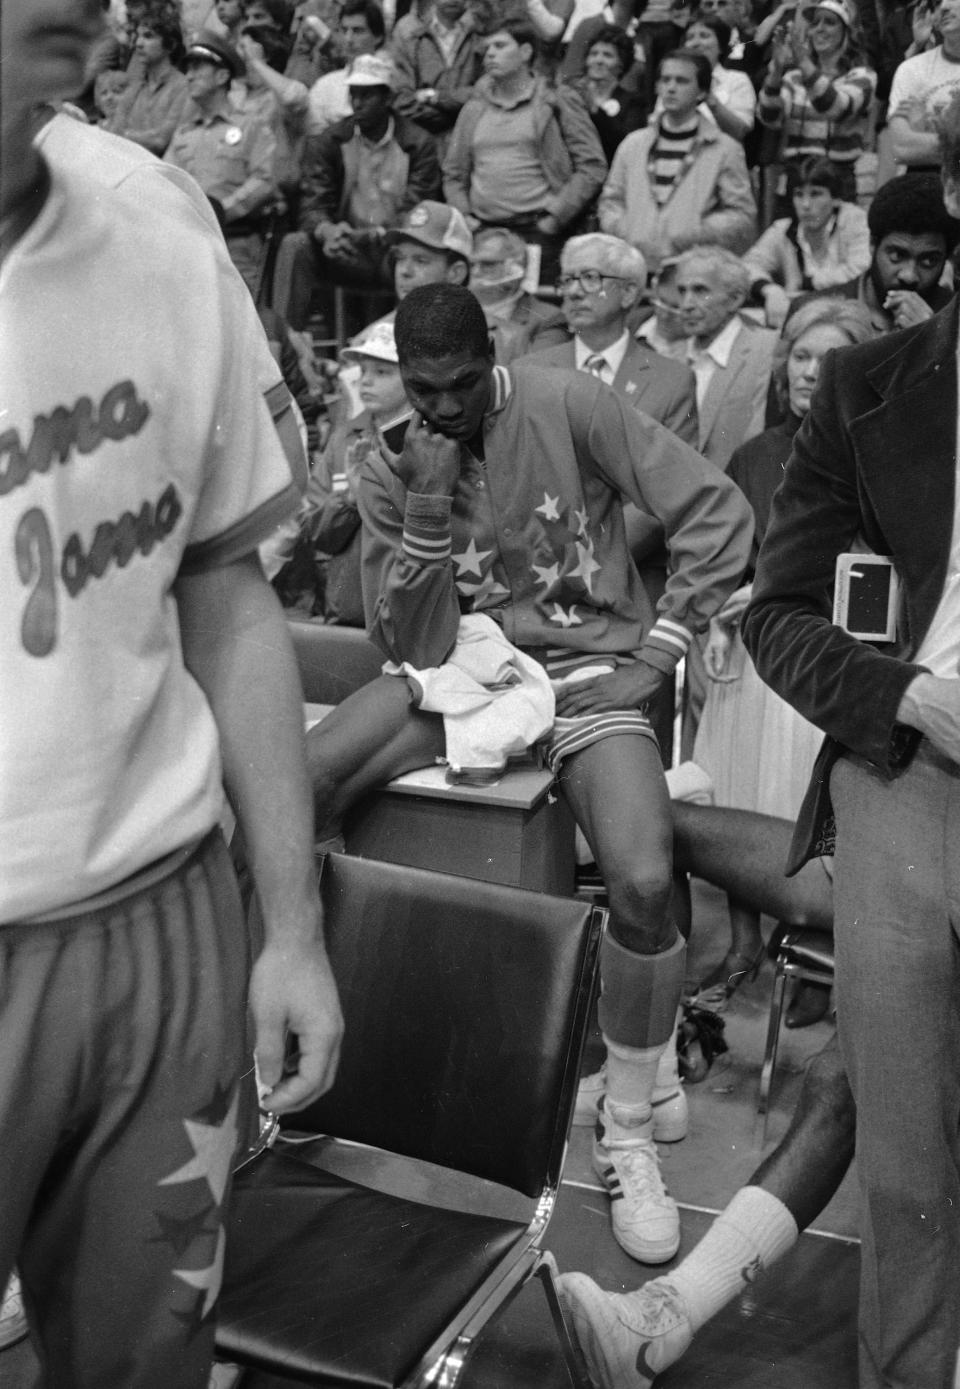 FILE - In this April 5, 1983, file photo, University of Houston's Akeem Olajuwon sits after the last second shot by Lorenzo Charles of North Carolina State won the Final Four championship game game in Albuquerque, N.M. The NCAA and networks across the sports dial have infused fans with a hoops fix by rebroadcasting epic NCAA Tournament games. Coaches and players involved in those games are adding insight and a dash of humor by live tweeting during the replay. (AP Photo/File)